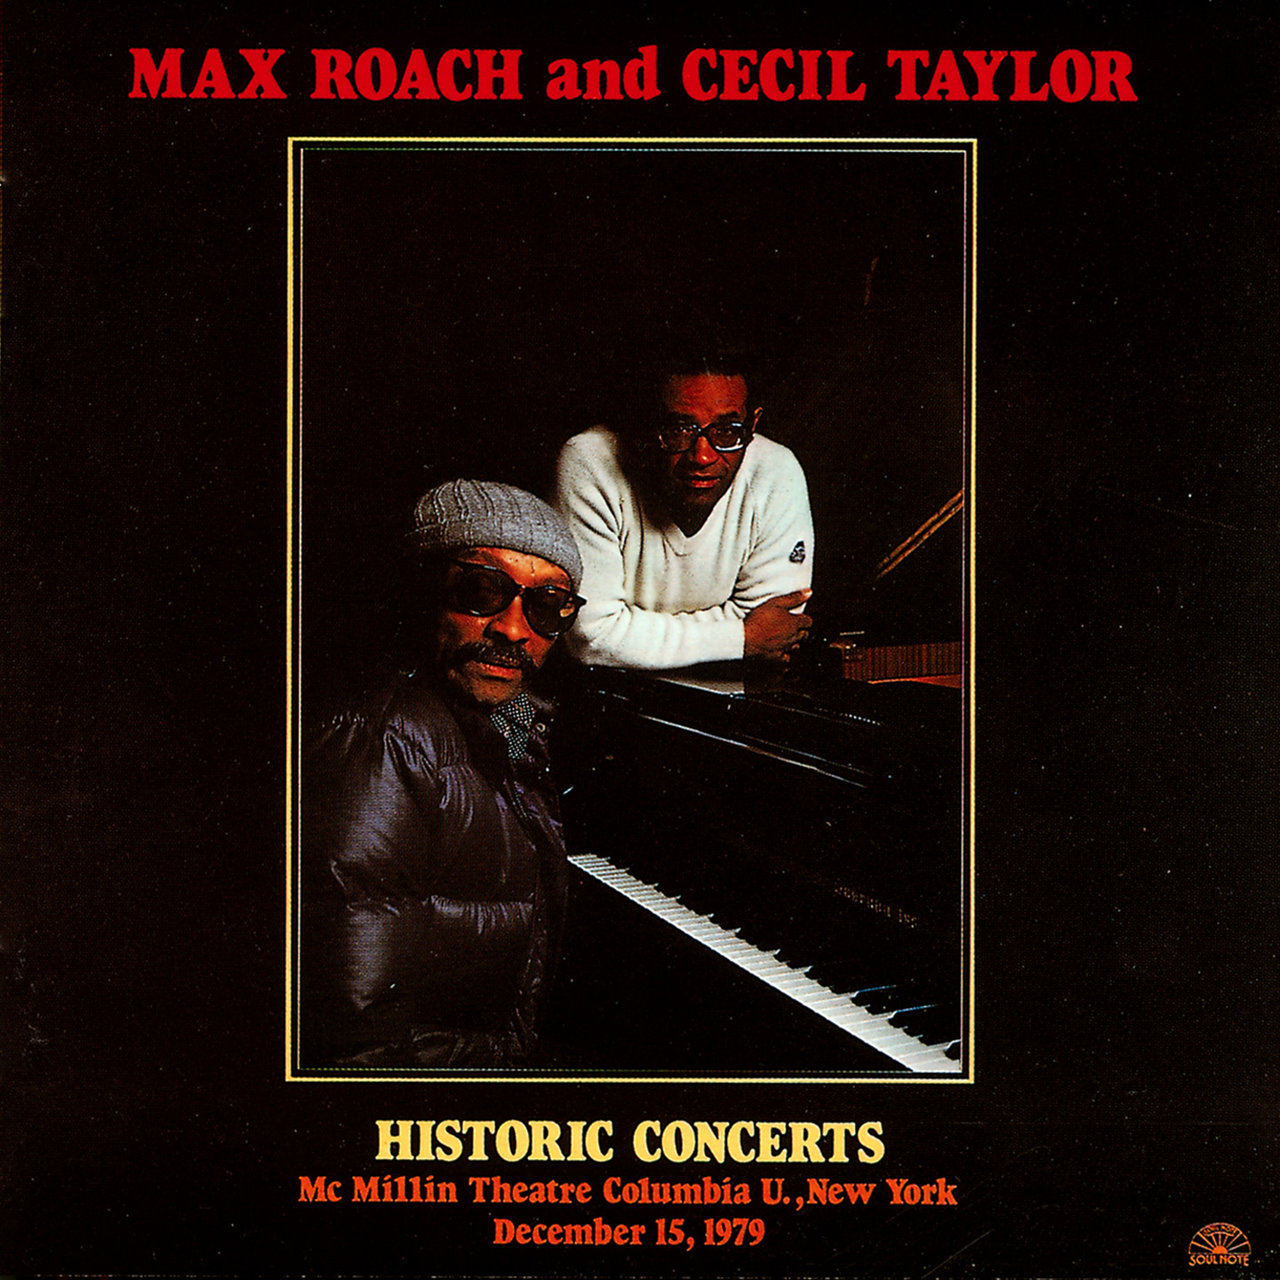 Max Roach and Cecil Taylor 'Historic Concerts, 1979'